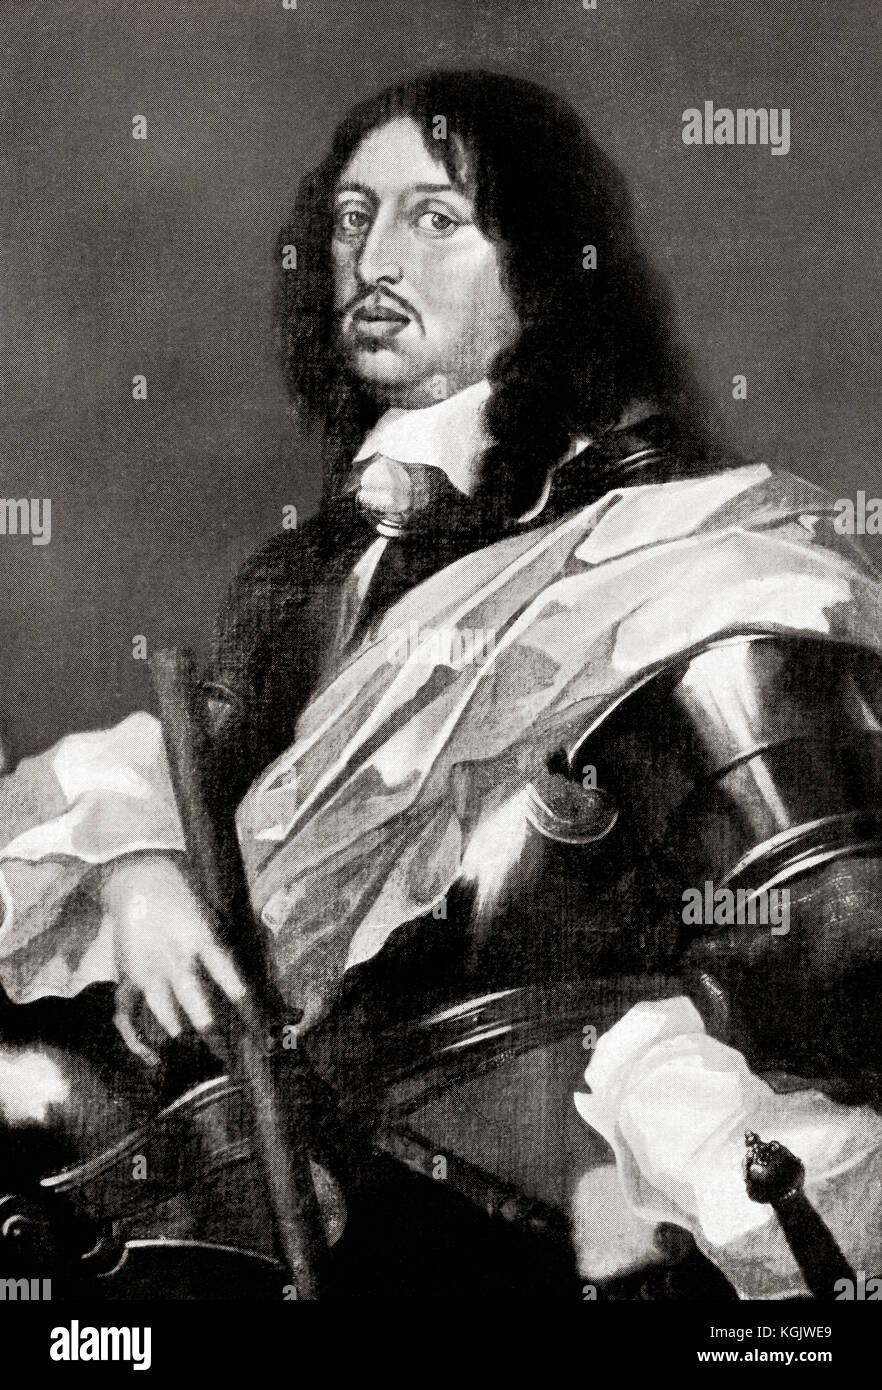 Charles X Gustav, aka Carl Gustav, 1622 – 1660.  King of Sweden.  From Hutchinson's History of the Nations, published 1915. Stock Photo